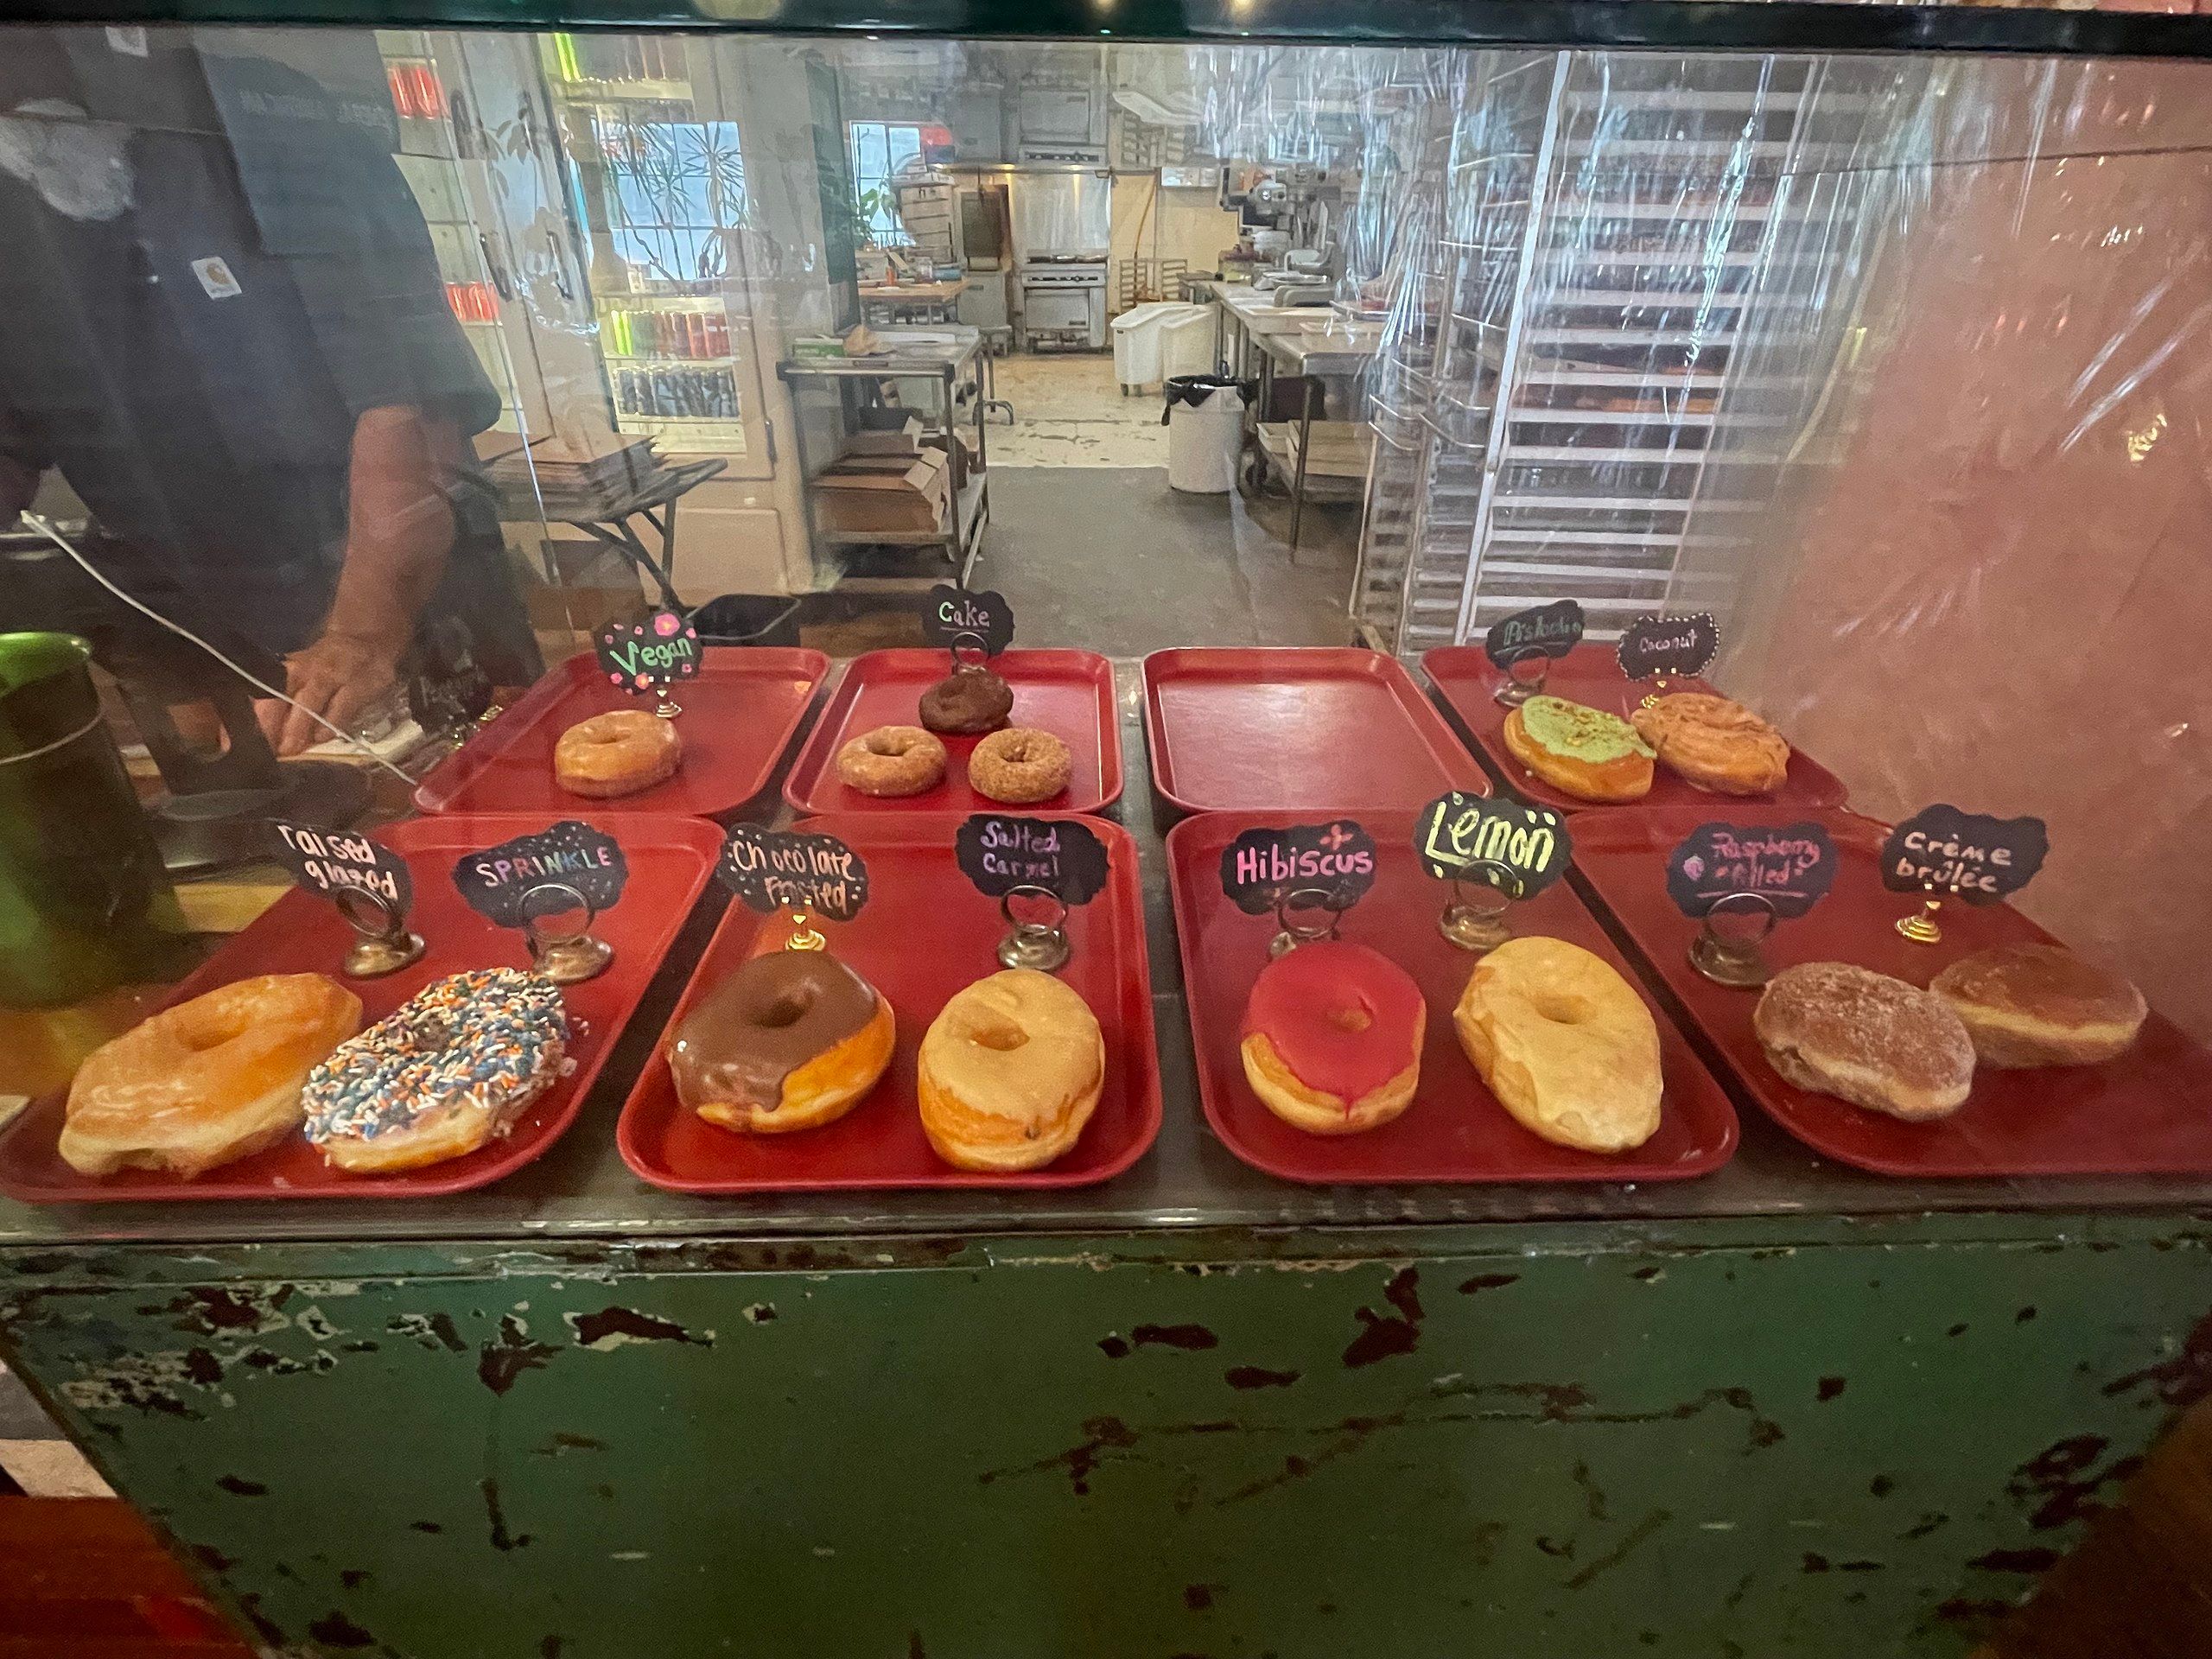 Donuts At General American Donut Company In Indianapolis, Indiana, USA